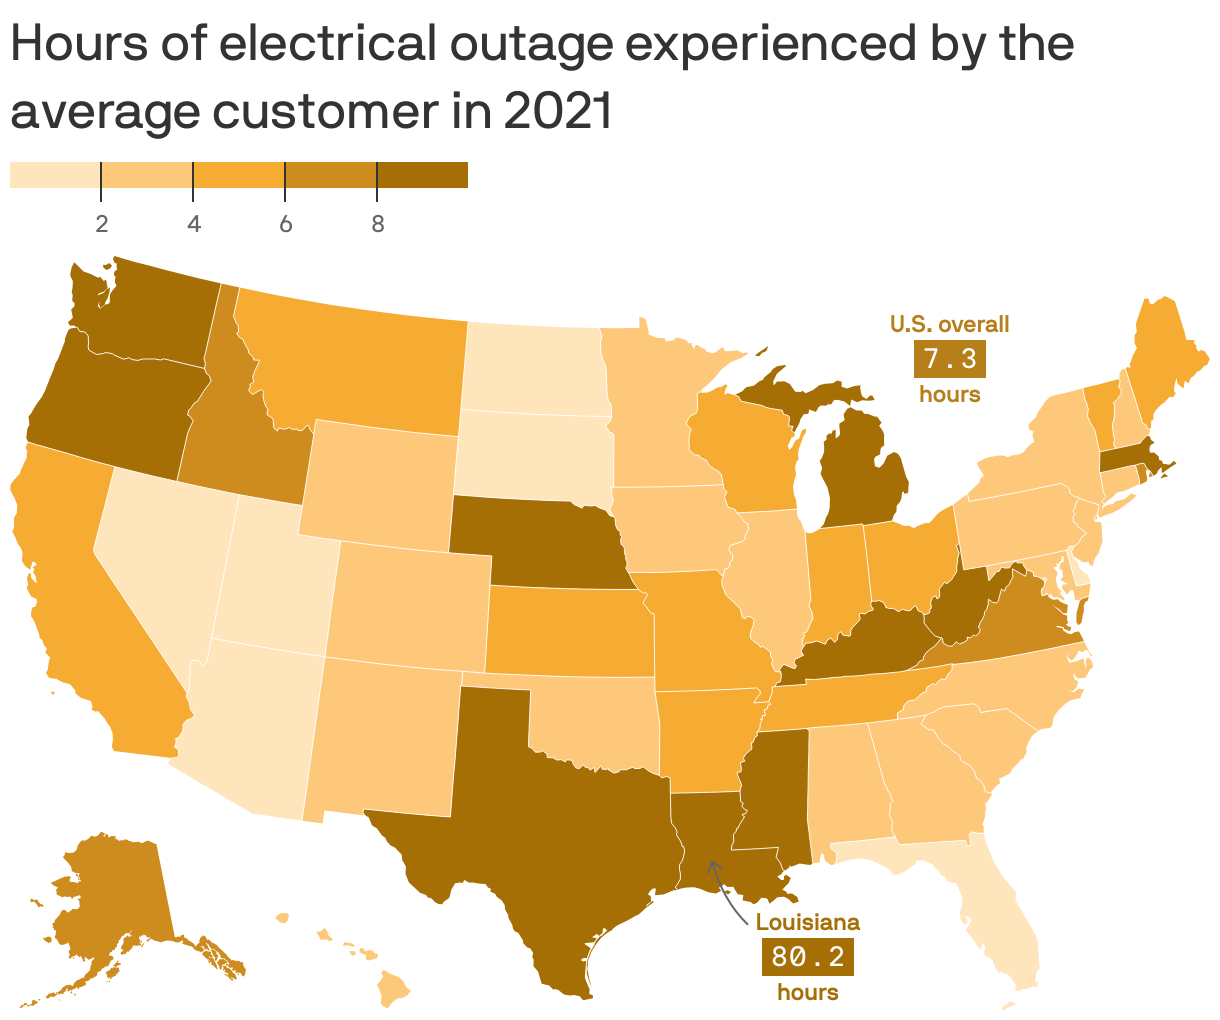 Hours of electrical outage experienced by the average customer in 2021